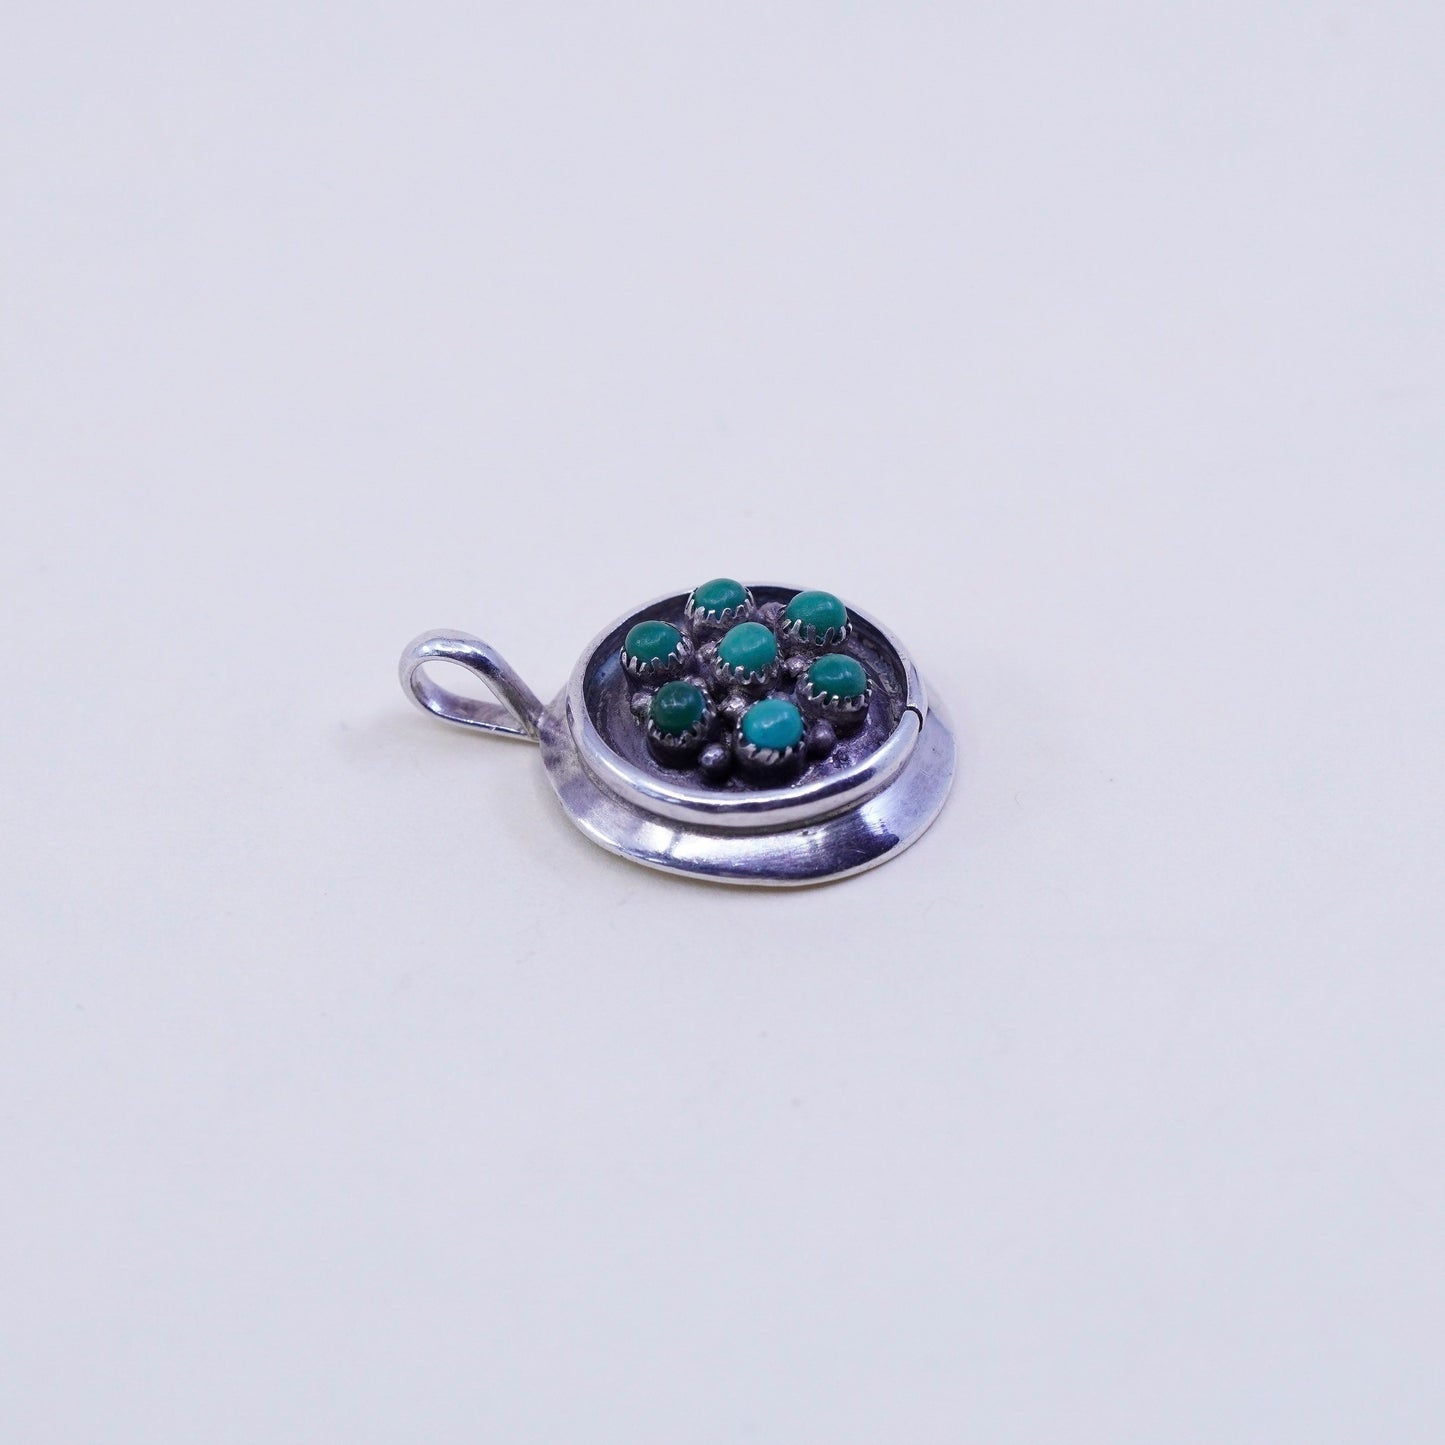 Zuni southwestern sterling silver handmade pendant, 925 circle with turquoise